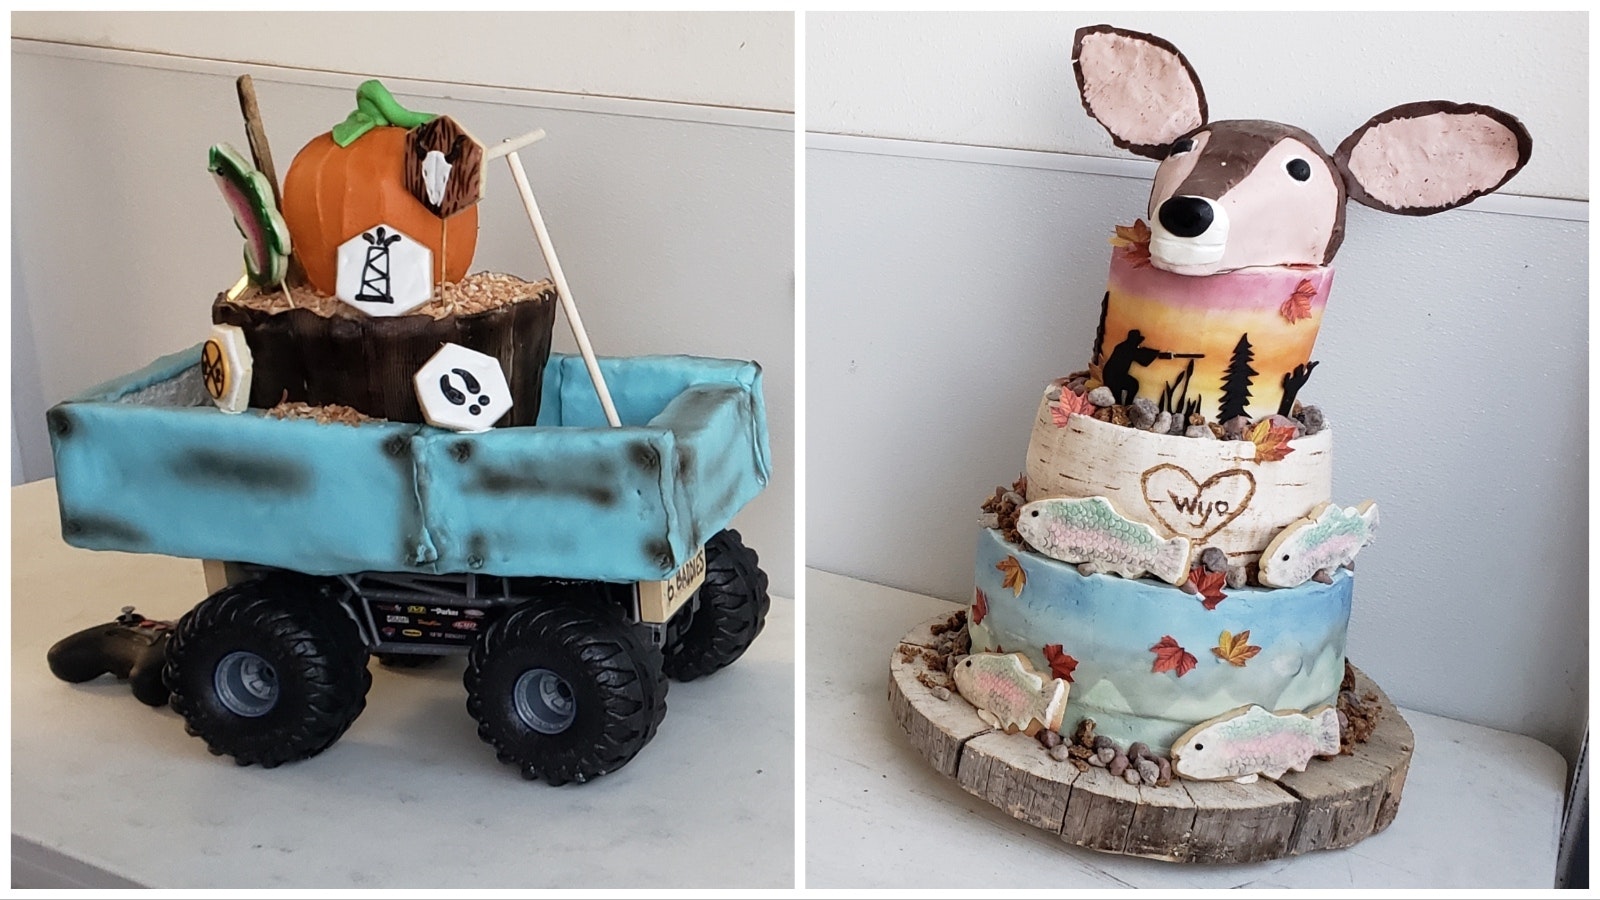 At left, a remote-controlled car carries the basket spice cake and pumpkin-shaped chocolate Guinness cake made by the Baddie Bakers. At right is "Hot" Pink Bakers' three-tier layer cake with three flavors, topped with a deer head made from pound cake and modeling chocolate. Judges chose the remote-control car cake as their favorite, but the crowd voted with their dollars for the "Hot" Pink Bakers cake, paying $120 for it, versus $55 for the other.